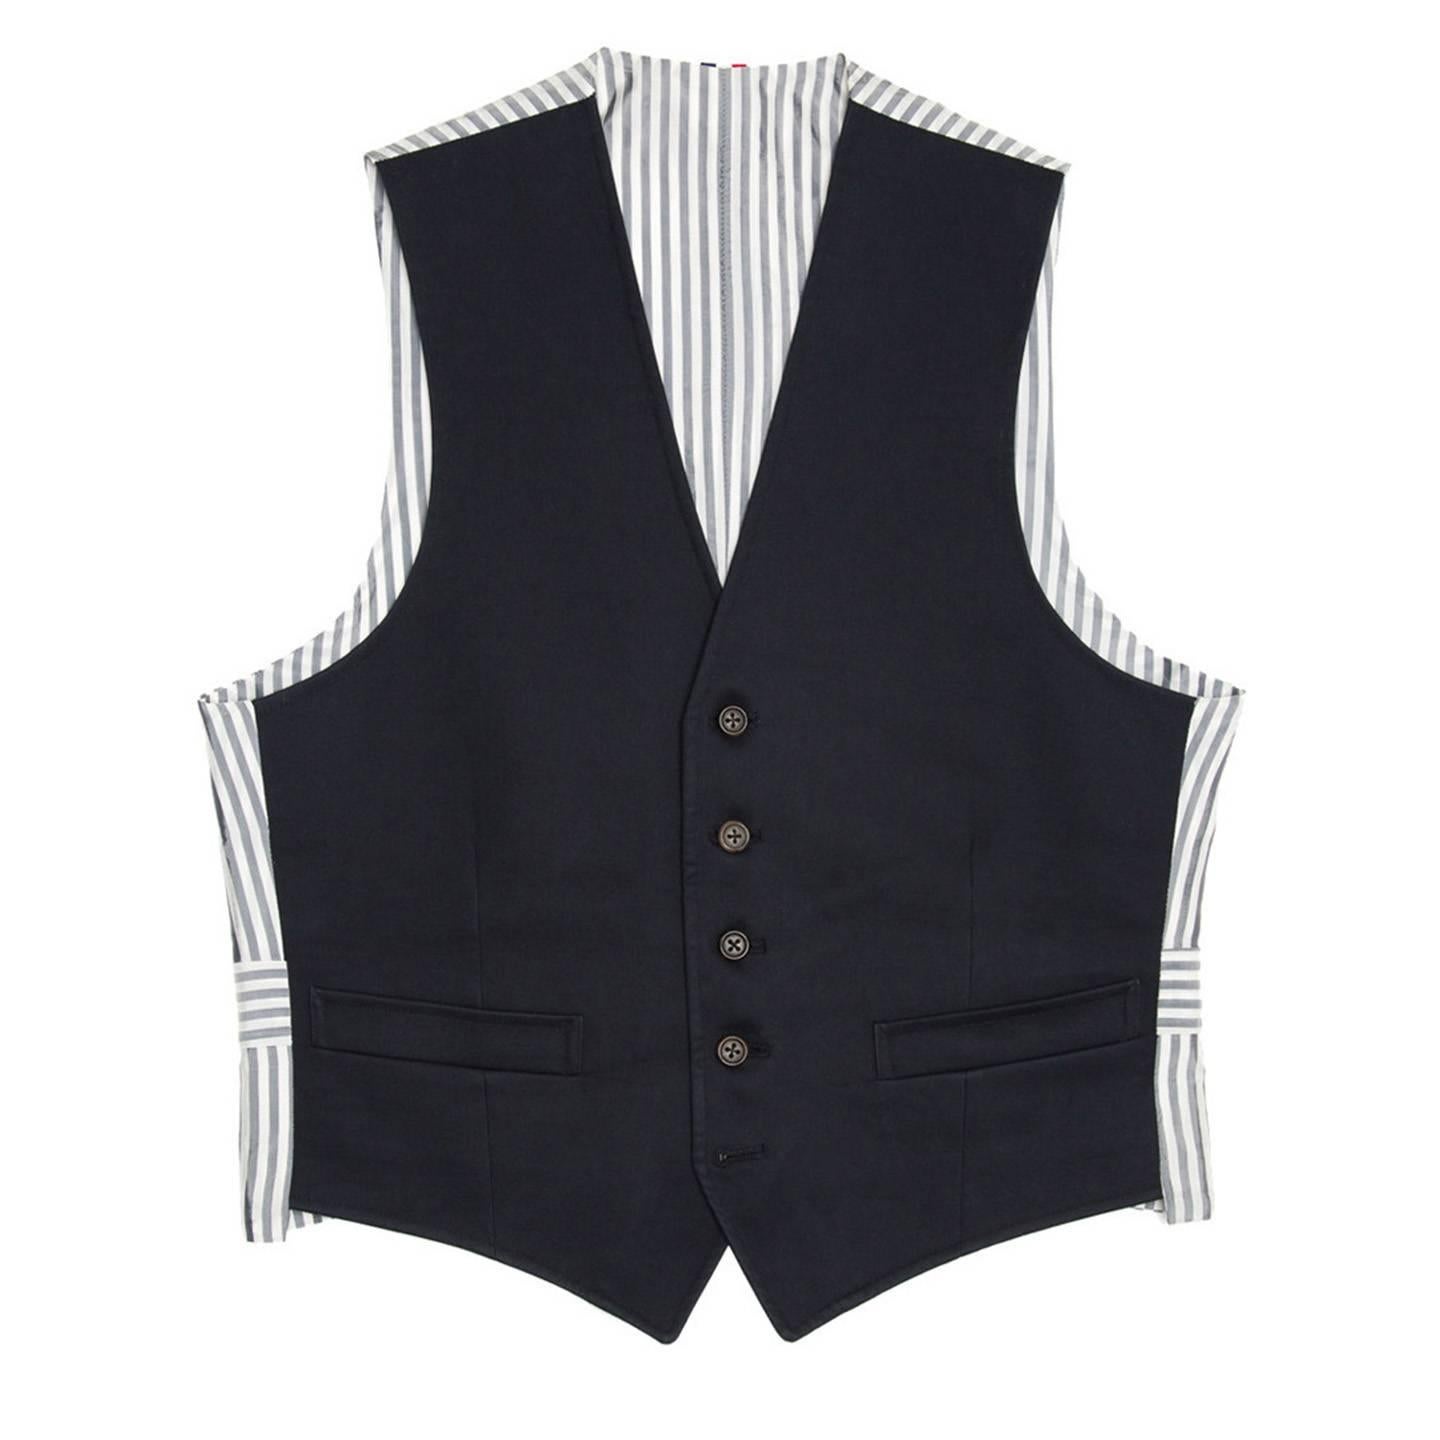 Fall 2010 navy blue Mackintosh fabric vest with blue & white striped back panel and adjustable buttoned back detail. Made for Man Worn by Women. 

Size  1

Condition  Excellent: worn a few times